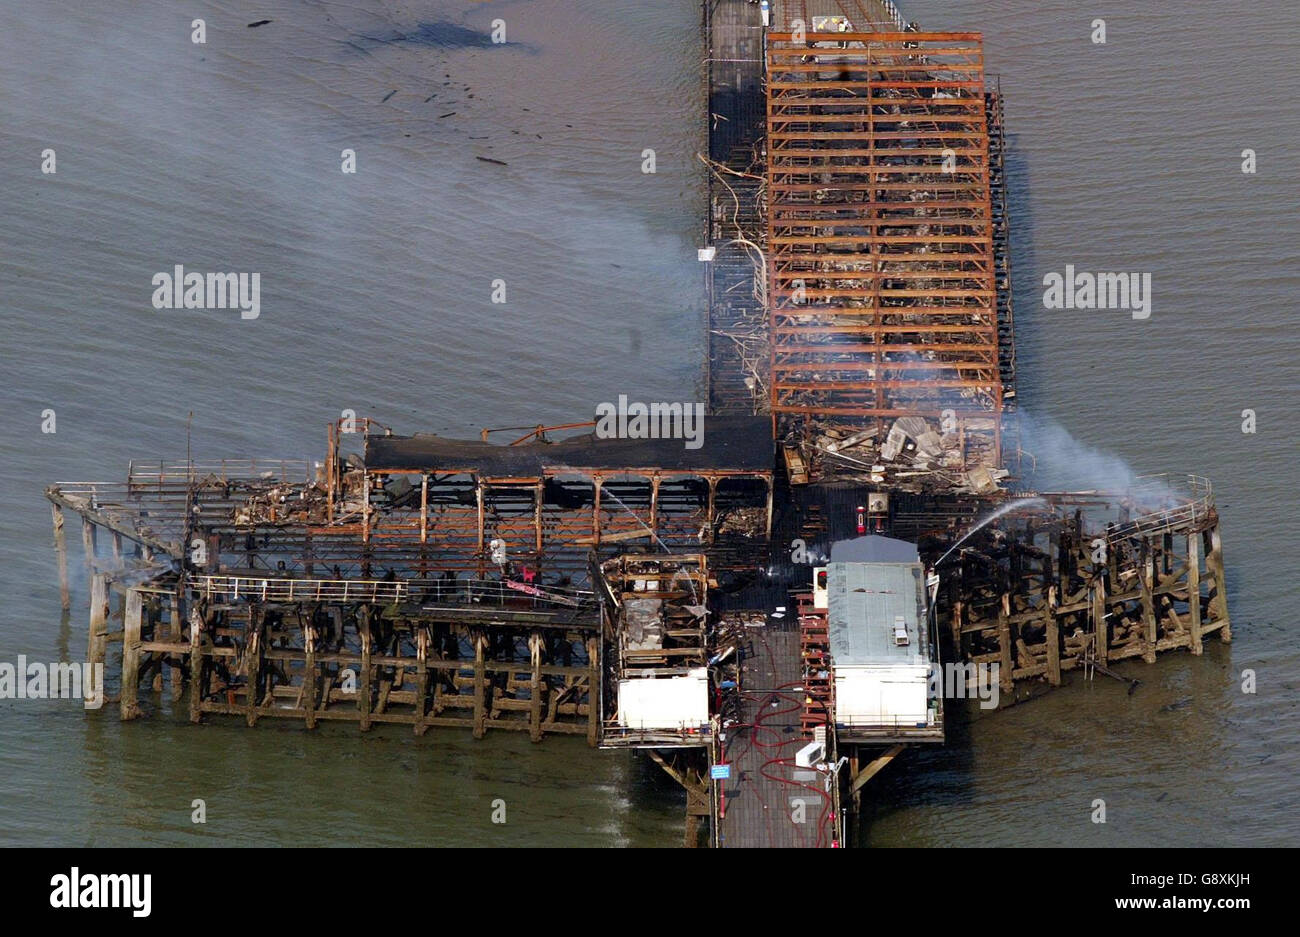 Southend pier smoulders following a fire Monday October 10, 2005. The world's longest pleasure pier will be rebuilt after it was gutted by a massive blaze, town officials pledged today. Southend Borough Council leader Anna Waite estimated it would cost millions to rebuild. See PA story FIRE Pier. PRESS ASSOCIATION Photo. Photo credit should read: Gareth Fuller/PA. Stock Photo